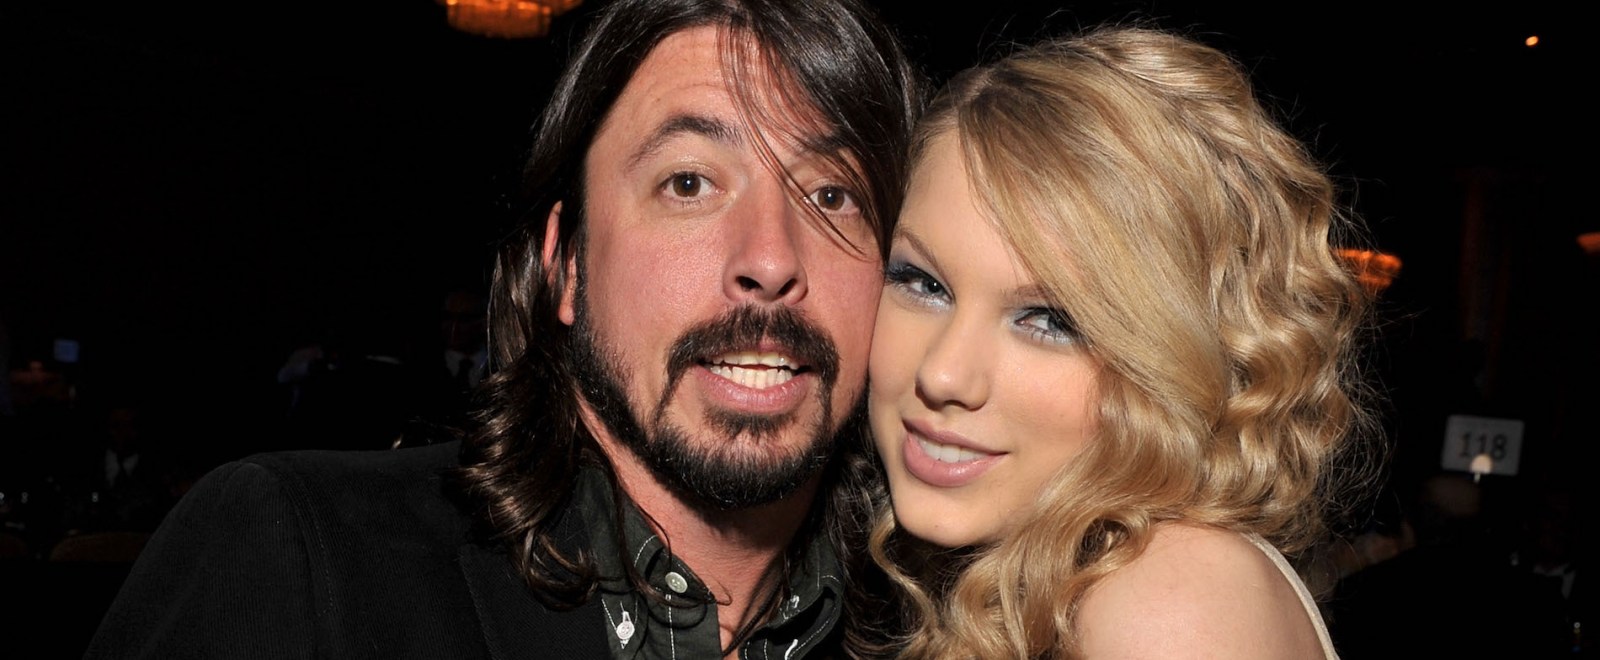 dave-grohl-taylor-swift-2008-getty-full.jpg